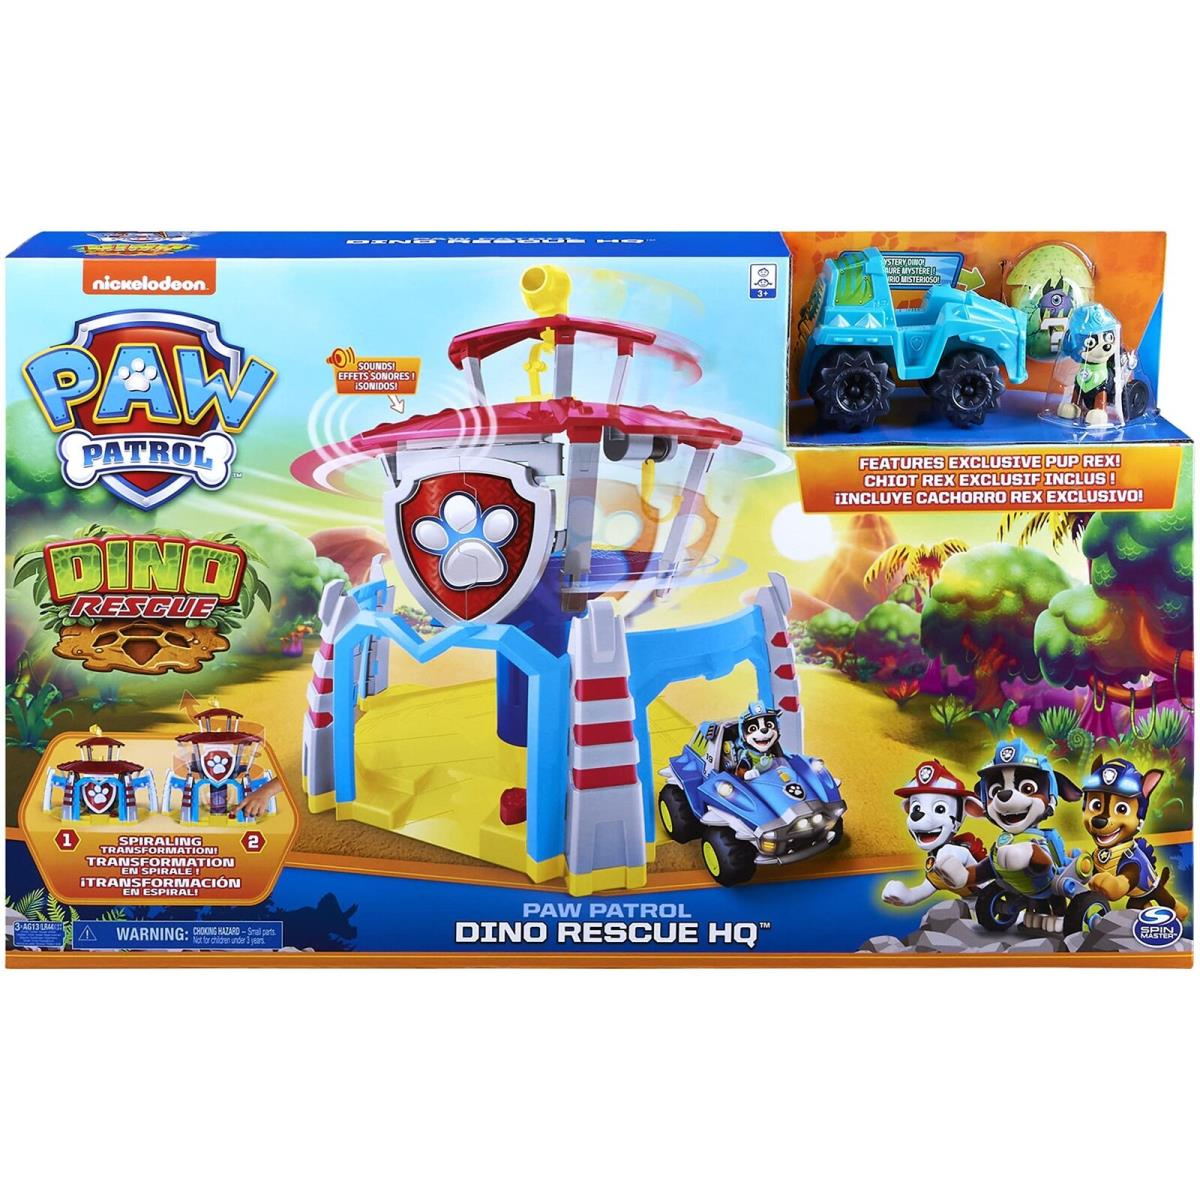 Paw Patrol Dino Rescue HQ Playset with Sounds and Exclusive Rex Figure